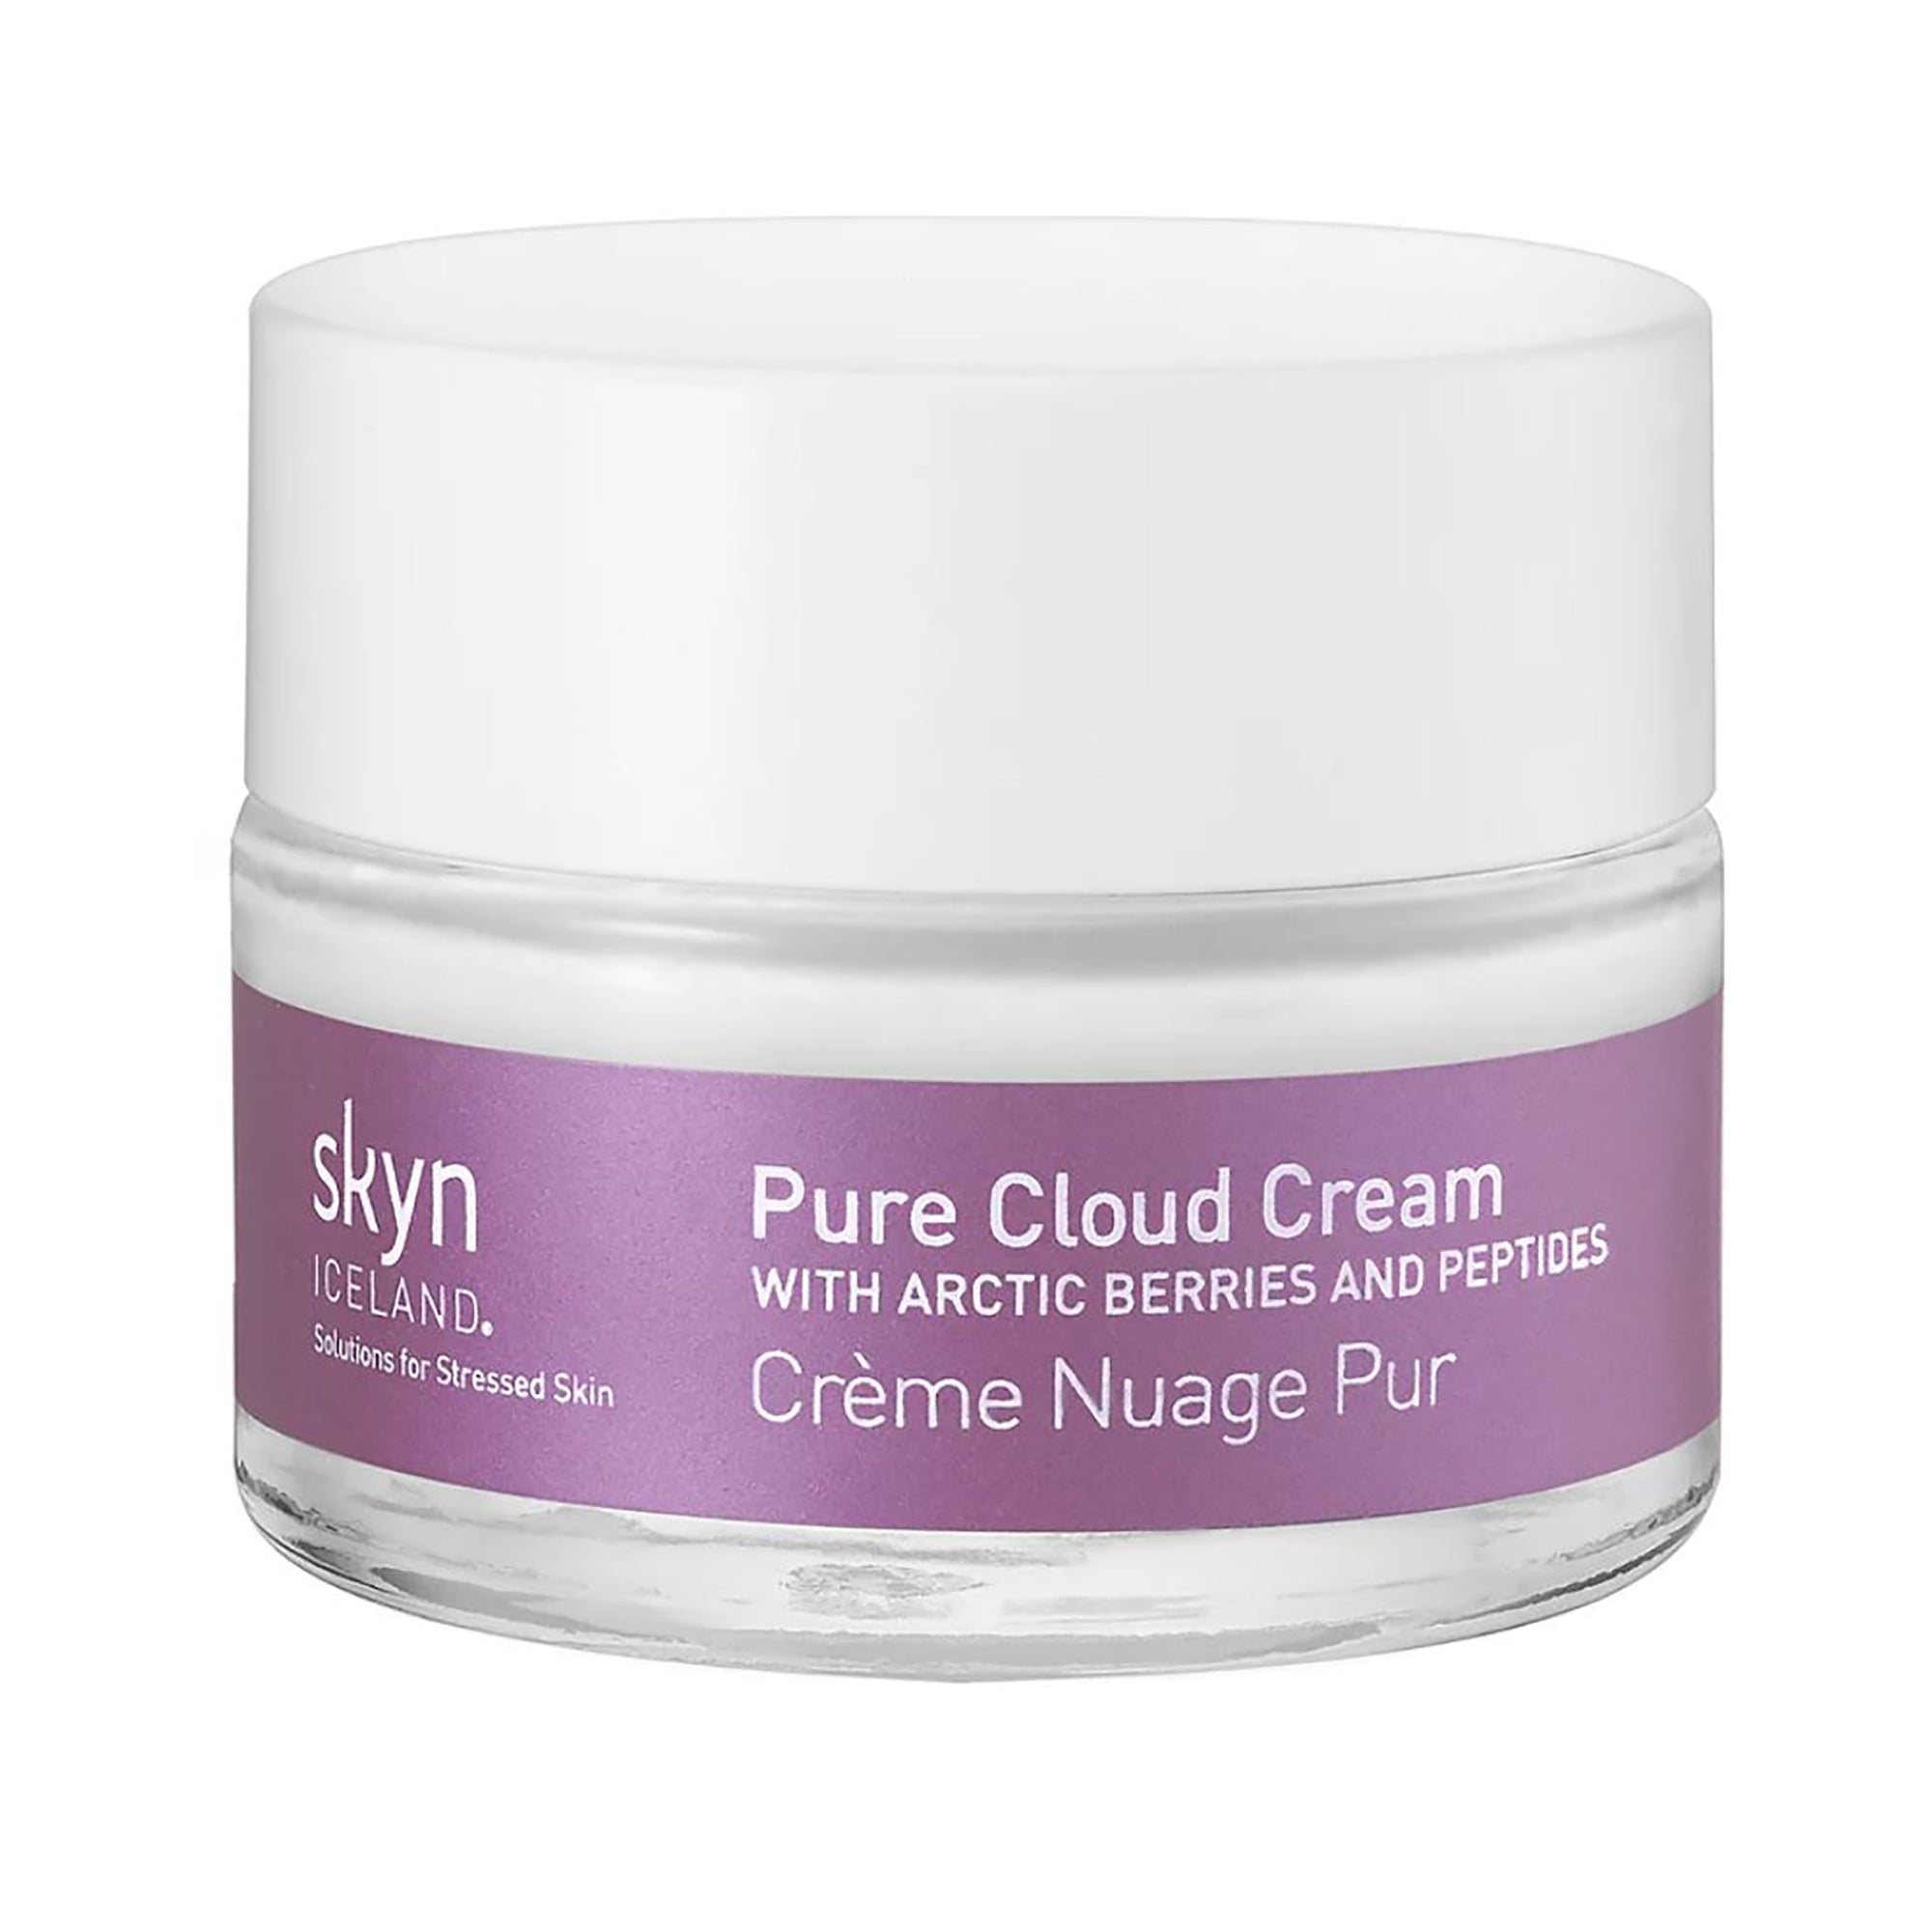 Skyn Iceland Pure Cloud Cream with Arctic Berries & Peptides / 1.7OZ